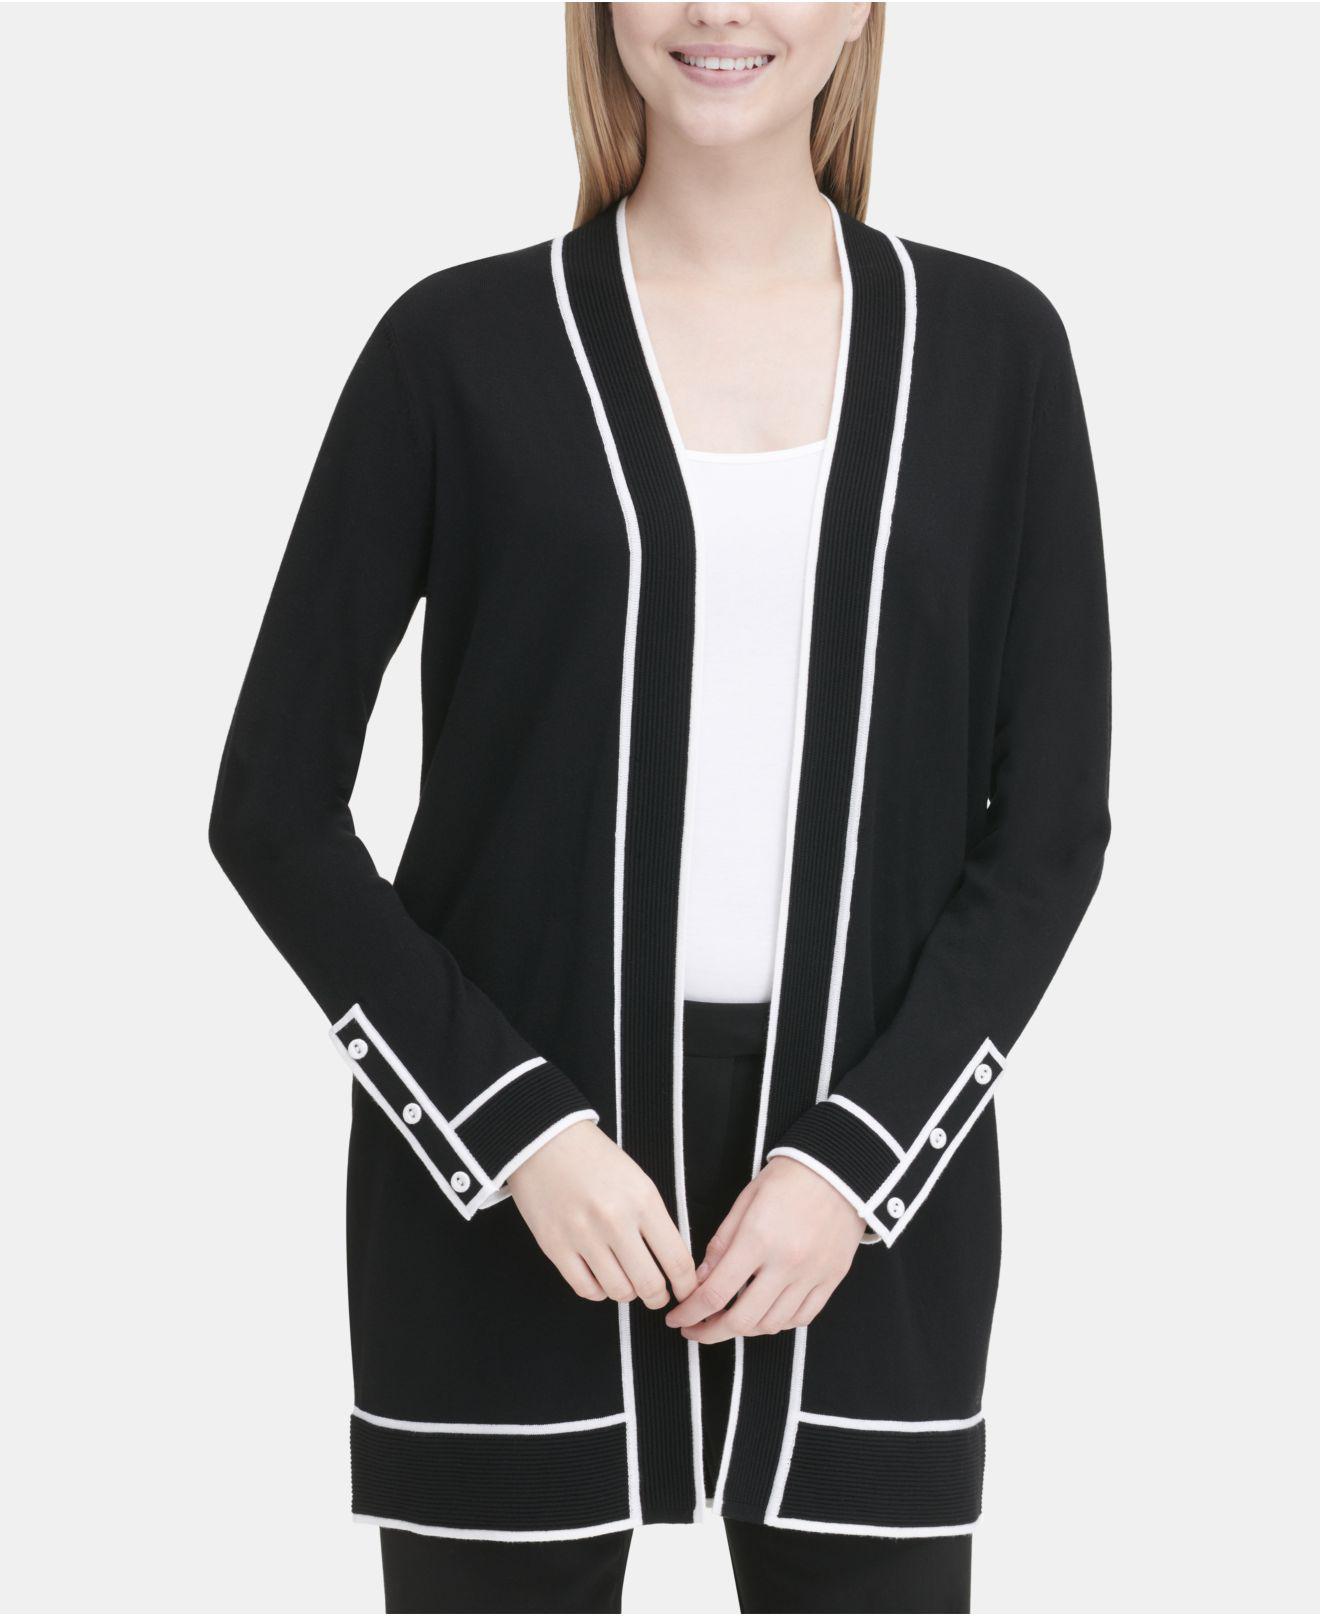 Calvin Klein Synthetic Cardigan With Rib Detail And Piping in Black/White  Combo (Black) - Lyst